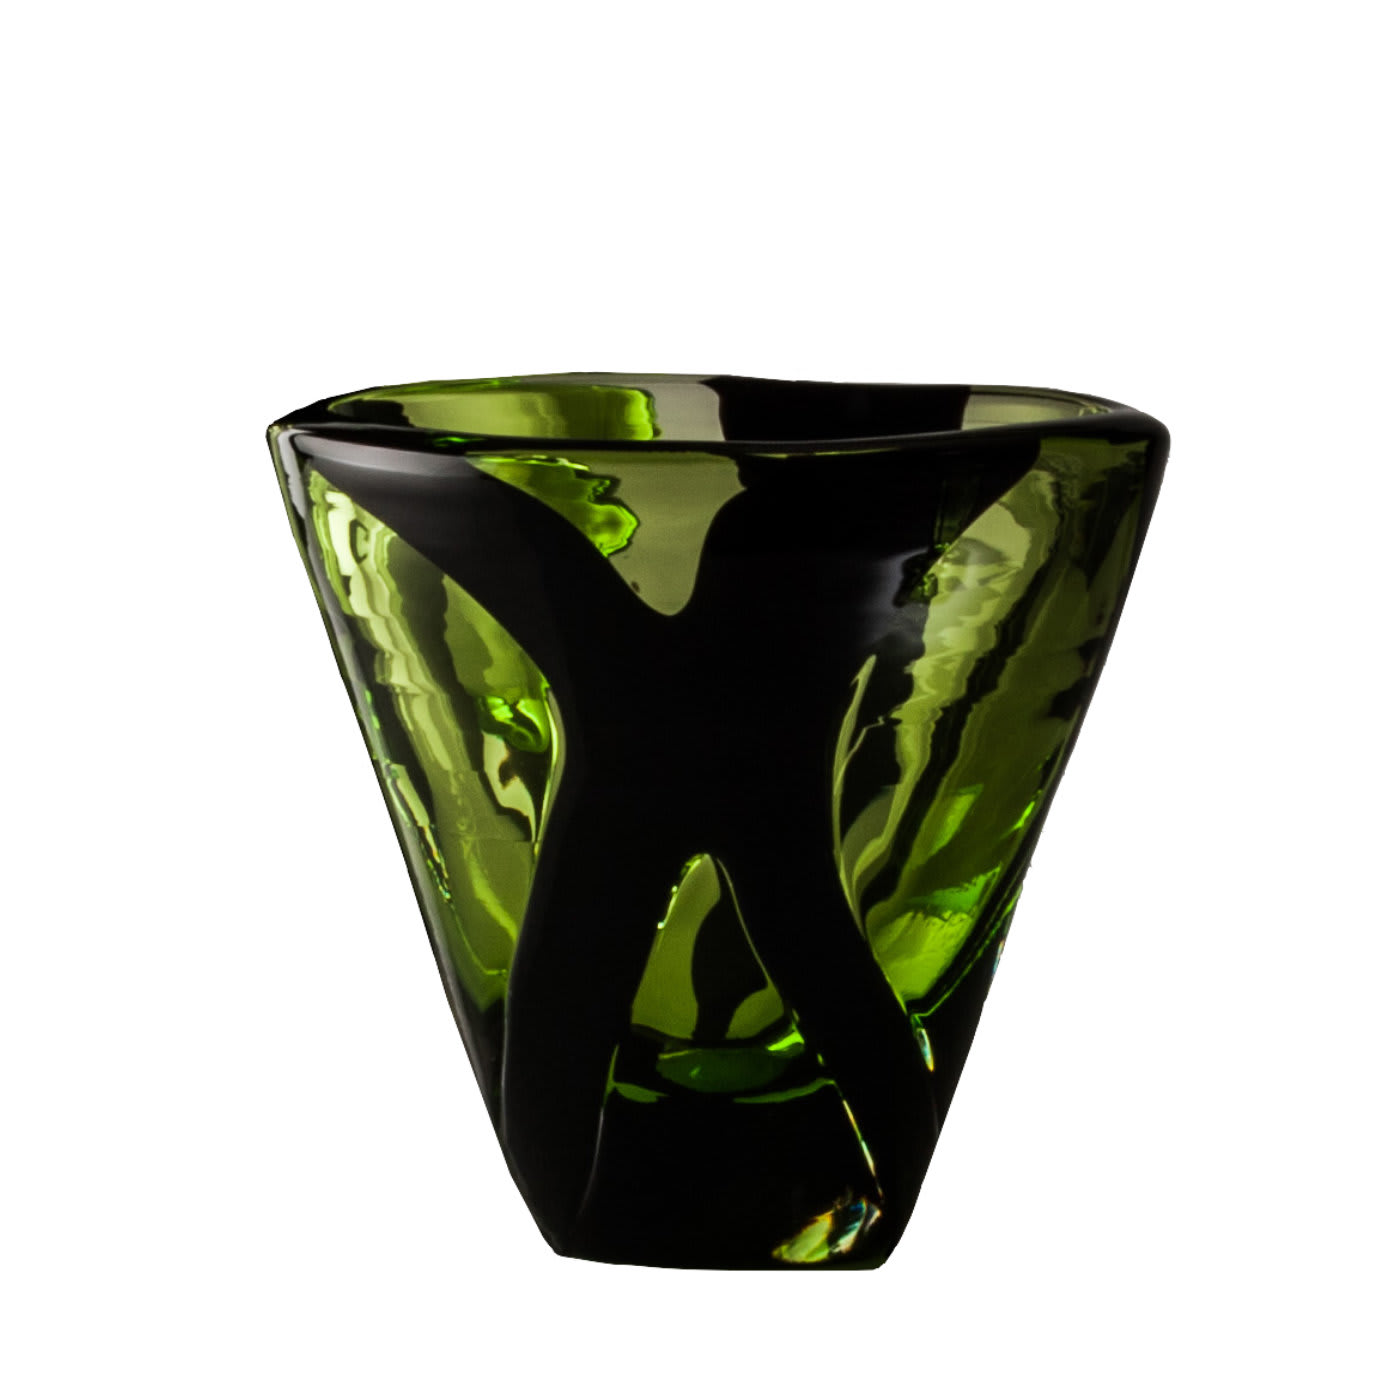 Black Belt Small Oval Vase by Peter Marino in Green - Venini